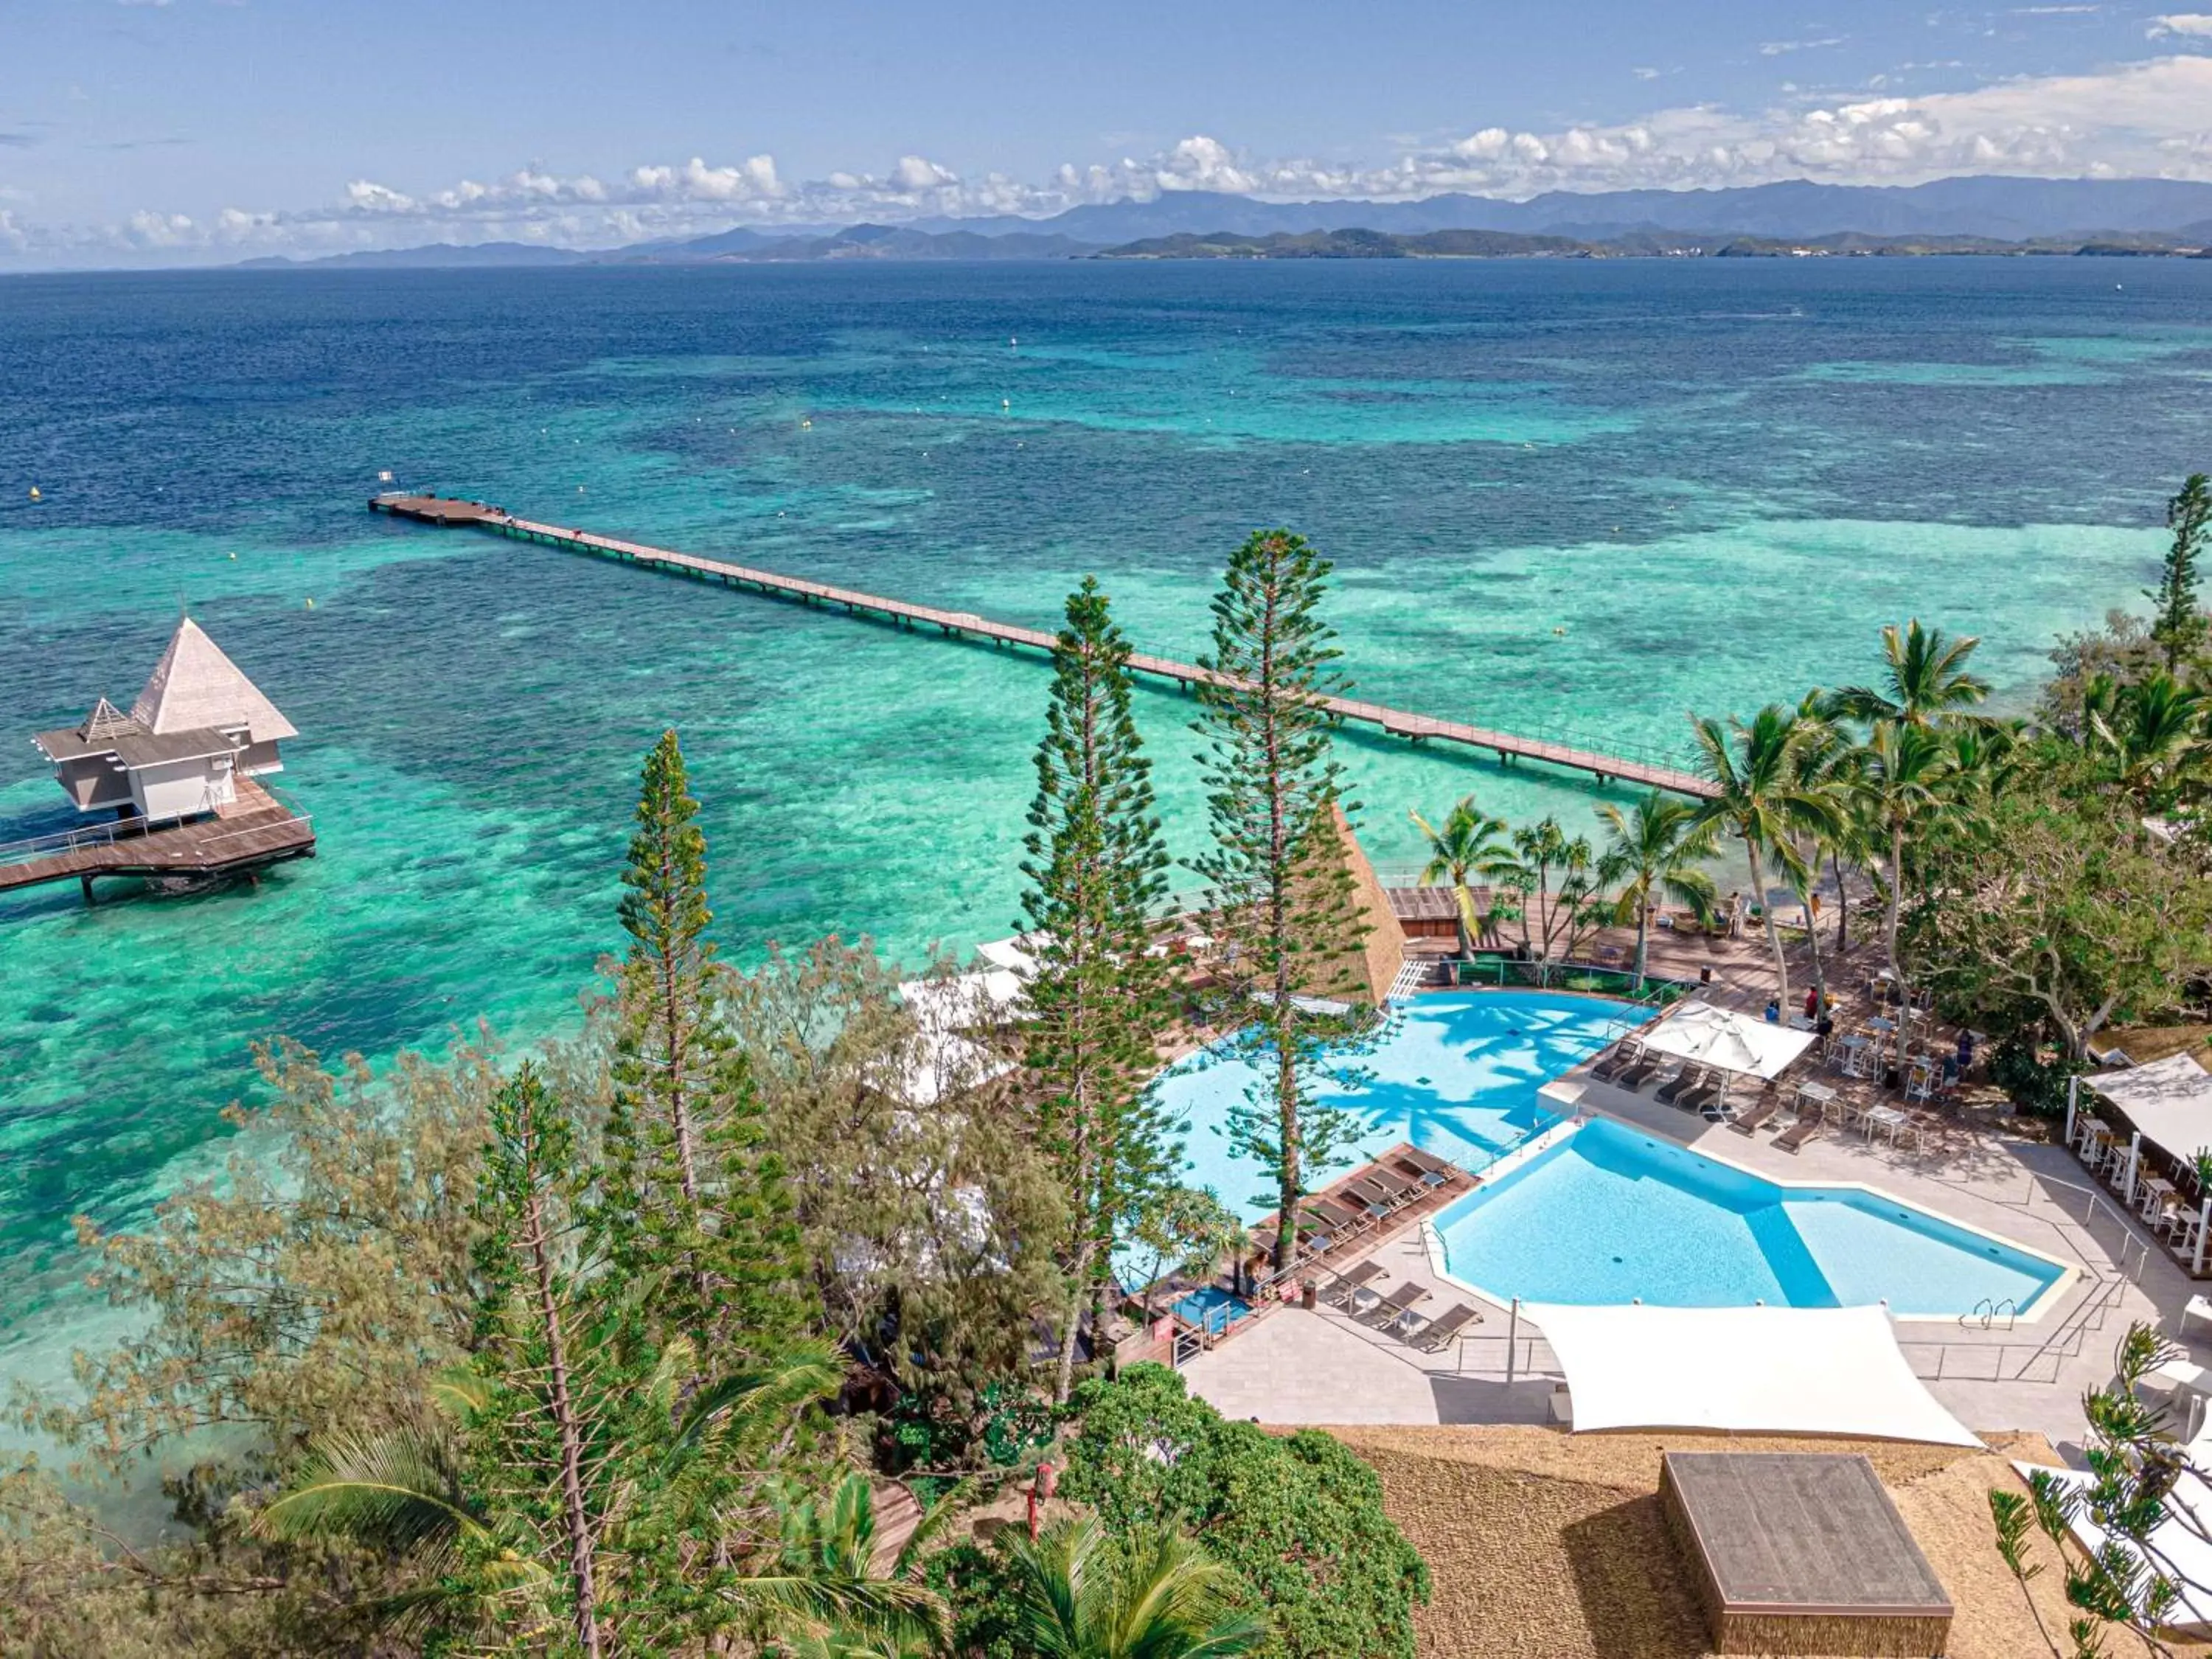 Property building, Pool View in DoubleTree by Hilton Noumea Ilot Maitre Resort